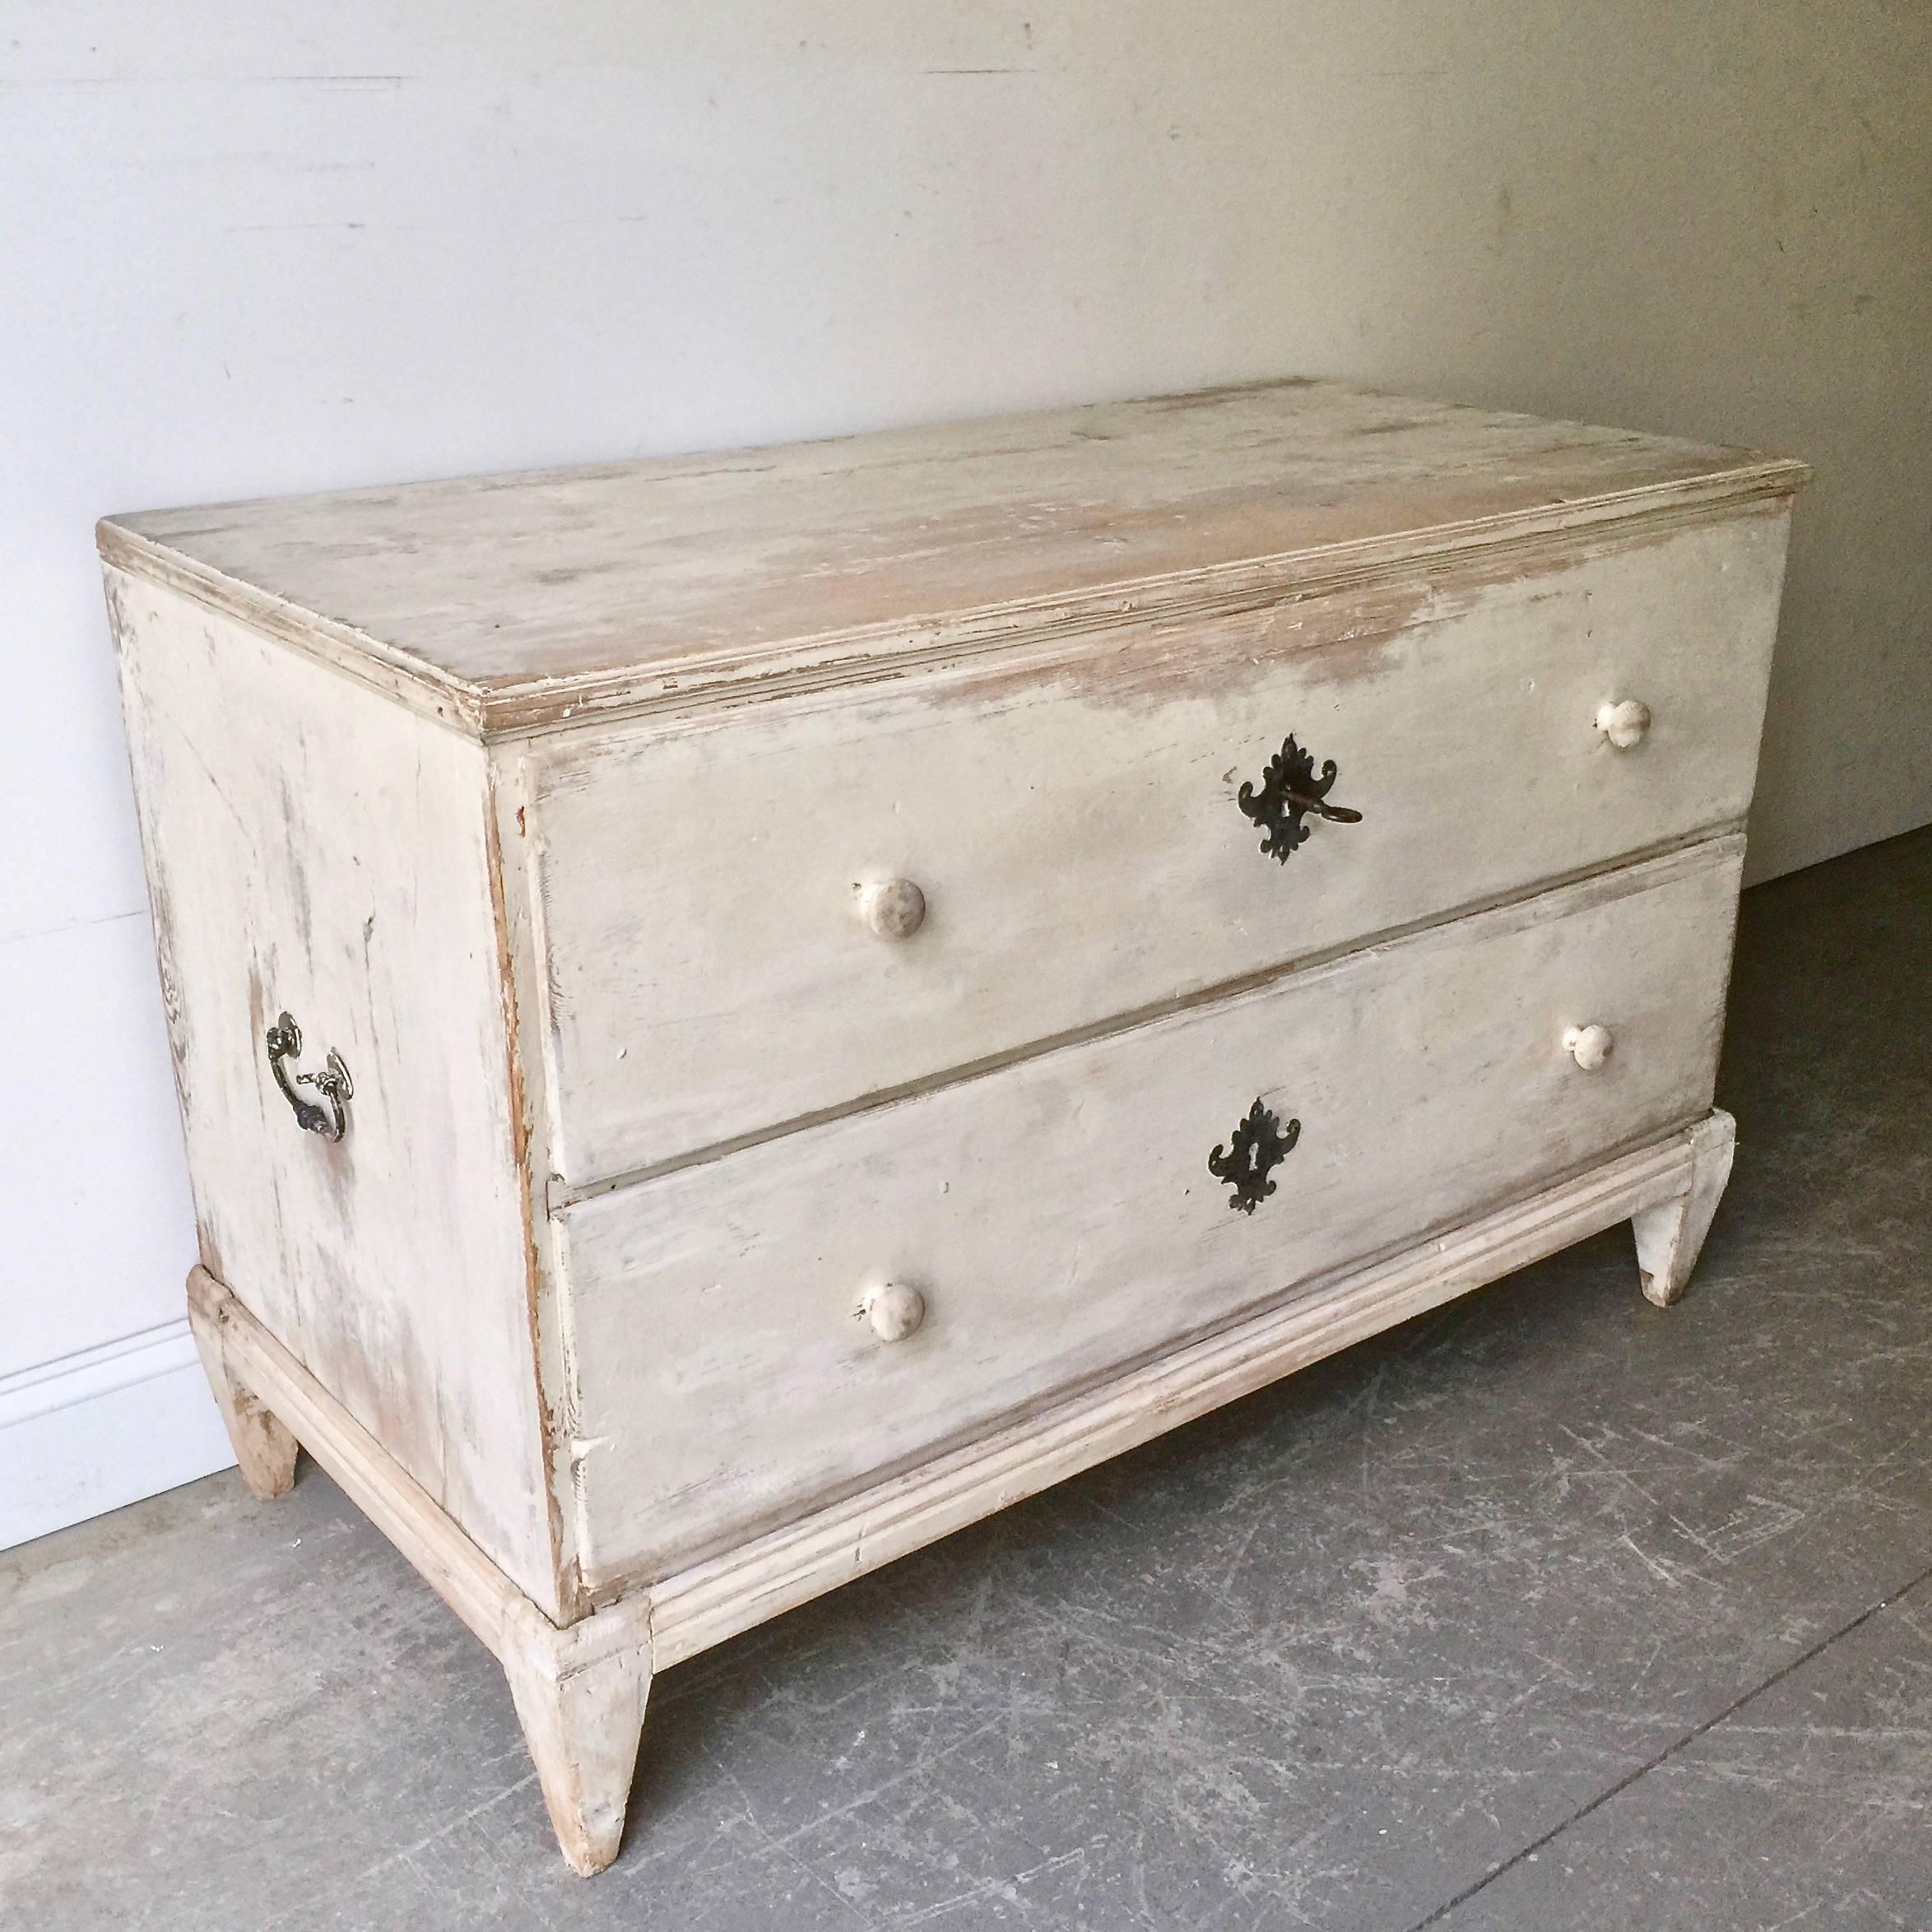 Charming 19th century two drawer chest on stand with handsome original oversized handles on each side for convenient travels.
Alsace region of France.

More than ever, we selected the best, the rarest, the unusual, the spectacular and the most